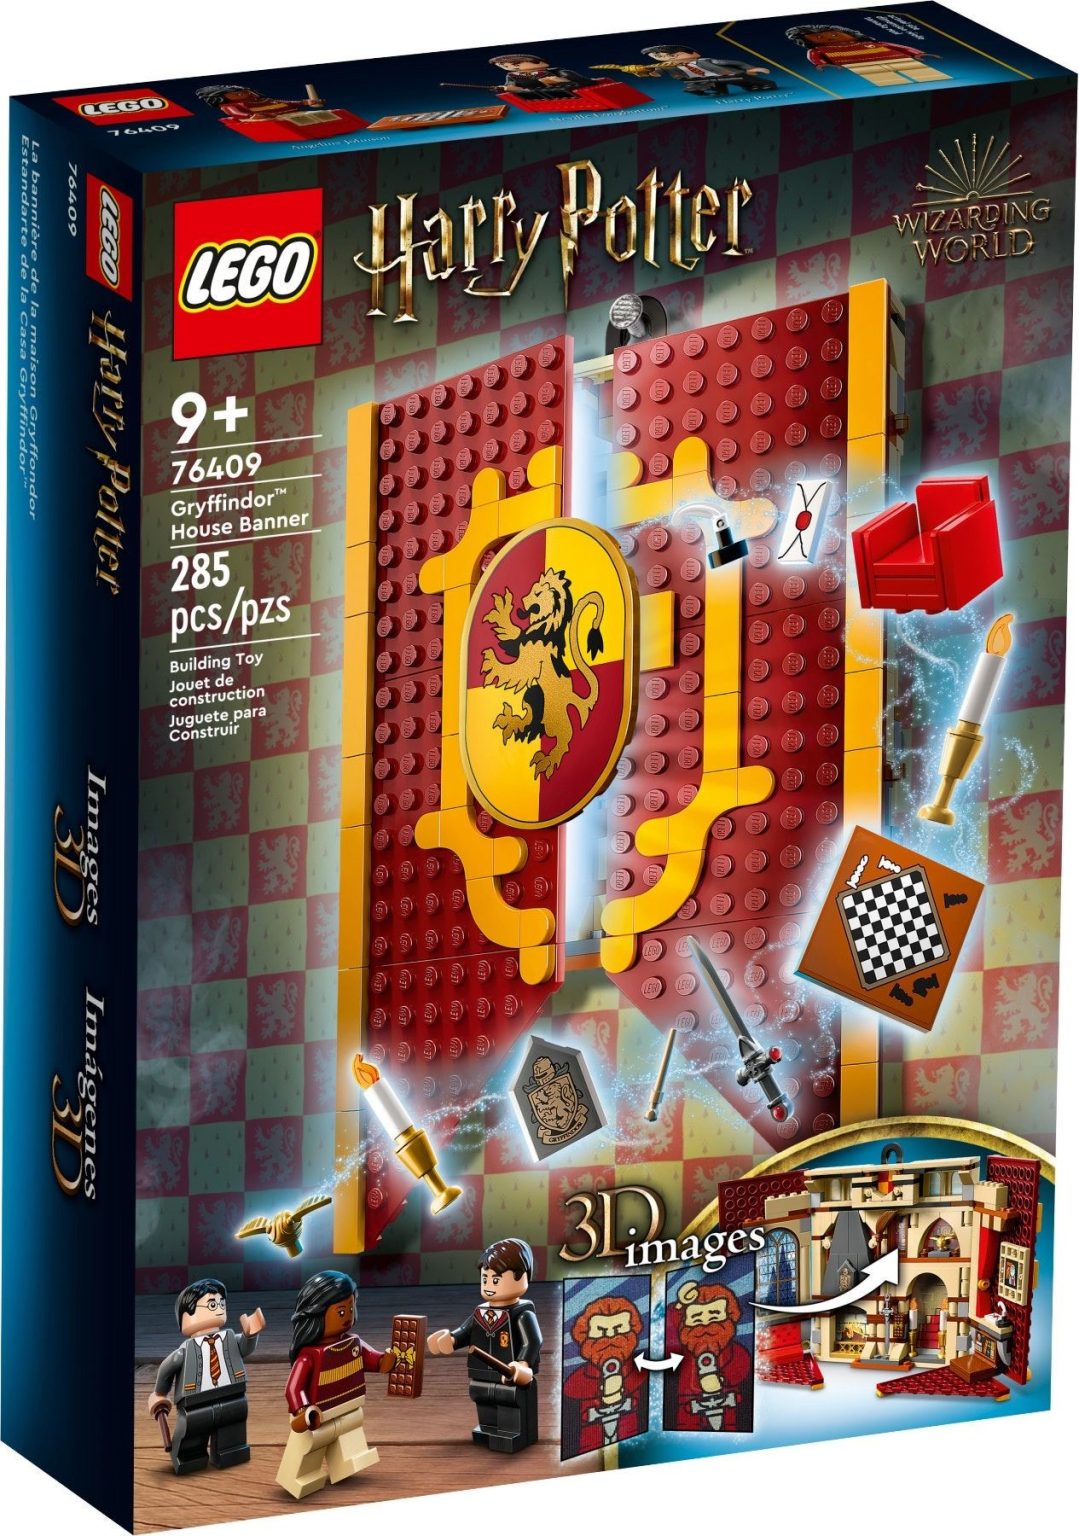 Every LEGO Harry Potter set retiring in 2023 and beyond